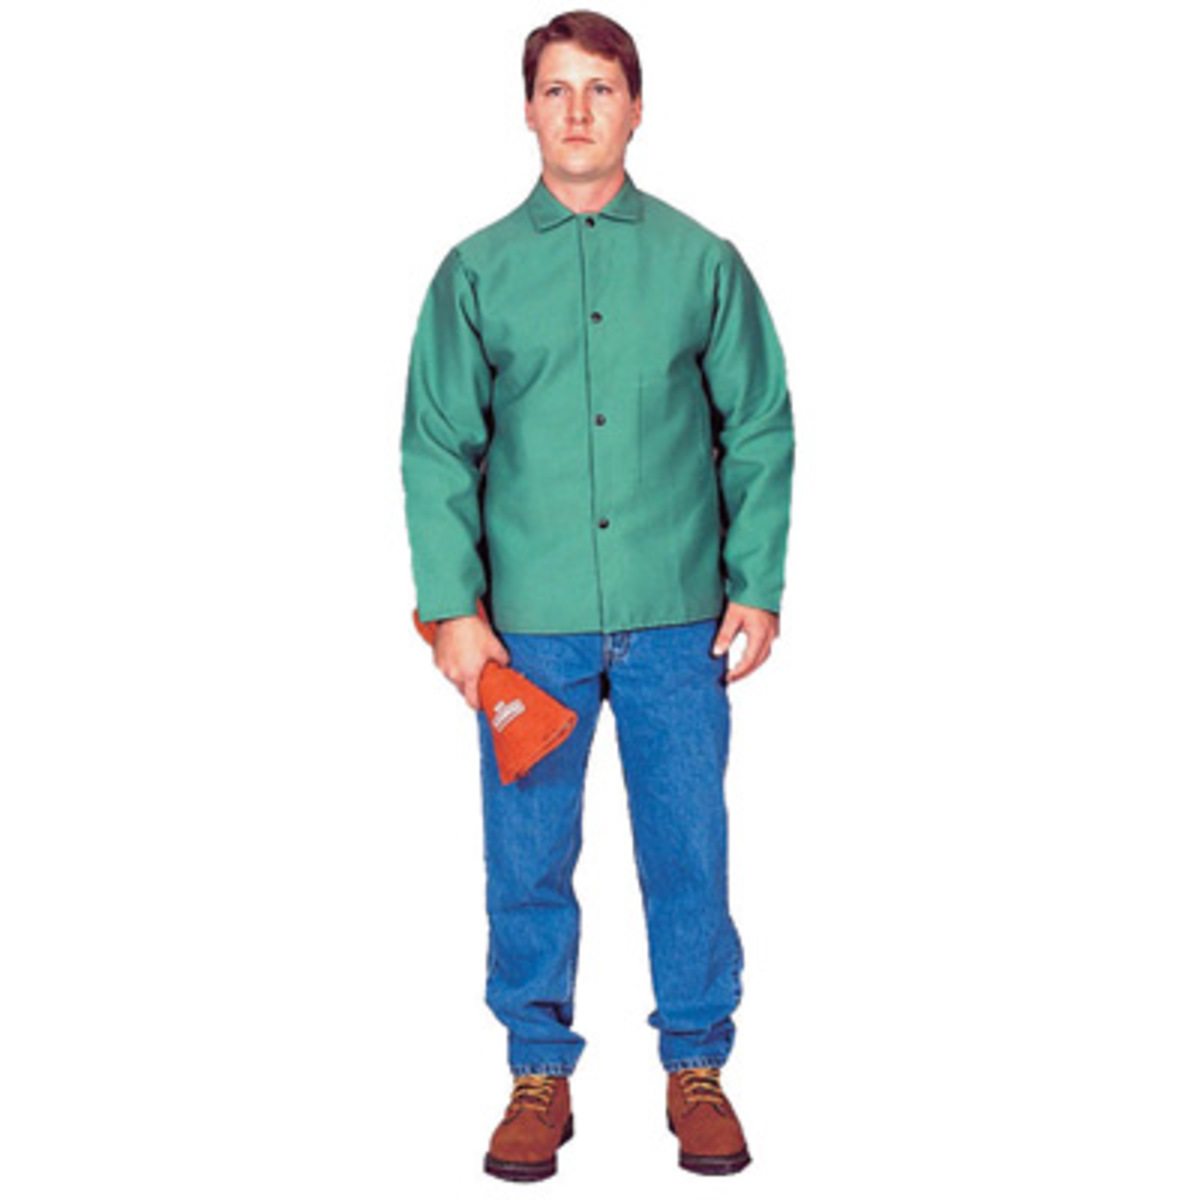 Stanco Safety Products™ Large Green Cotton Leather Sleeves Flame Resistant Welding Jacket With Snap Closure